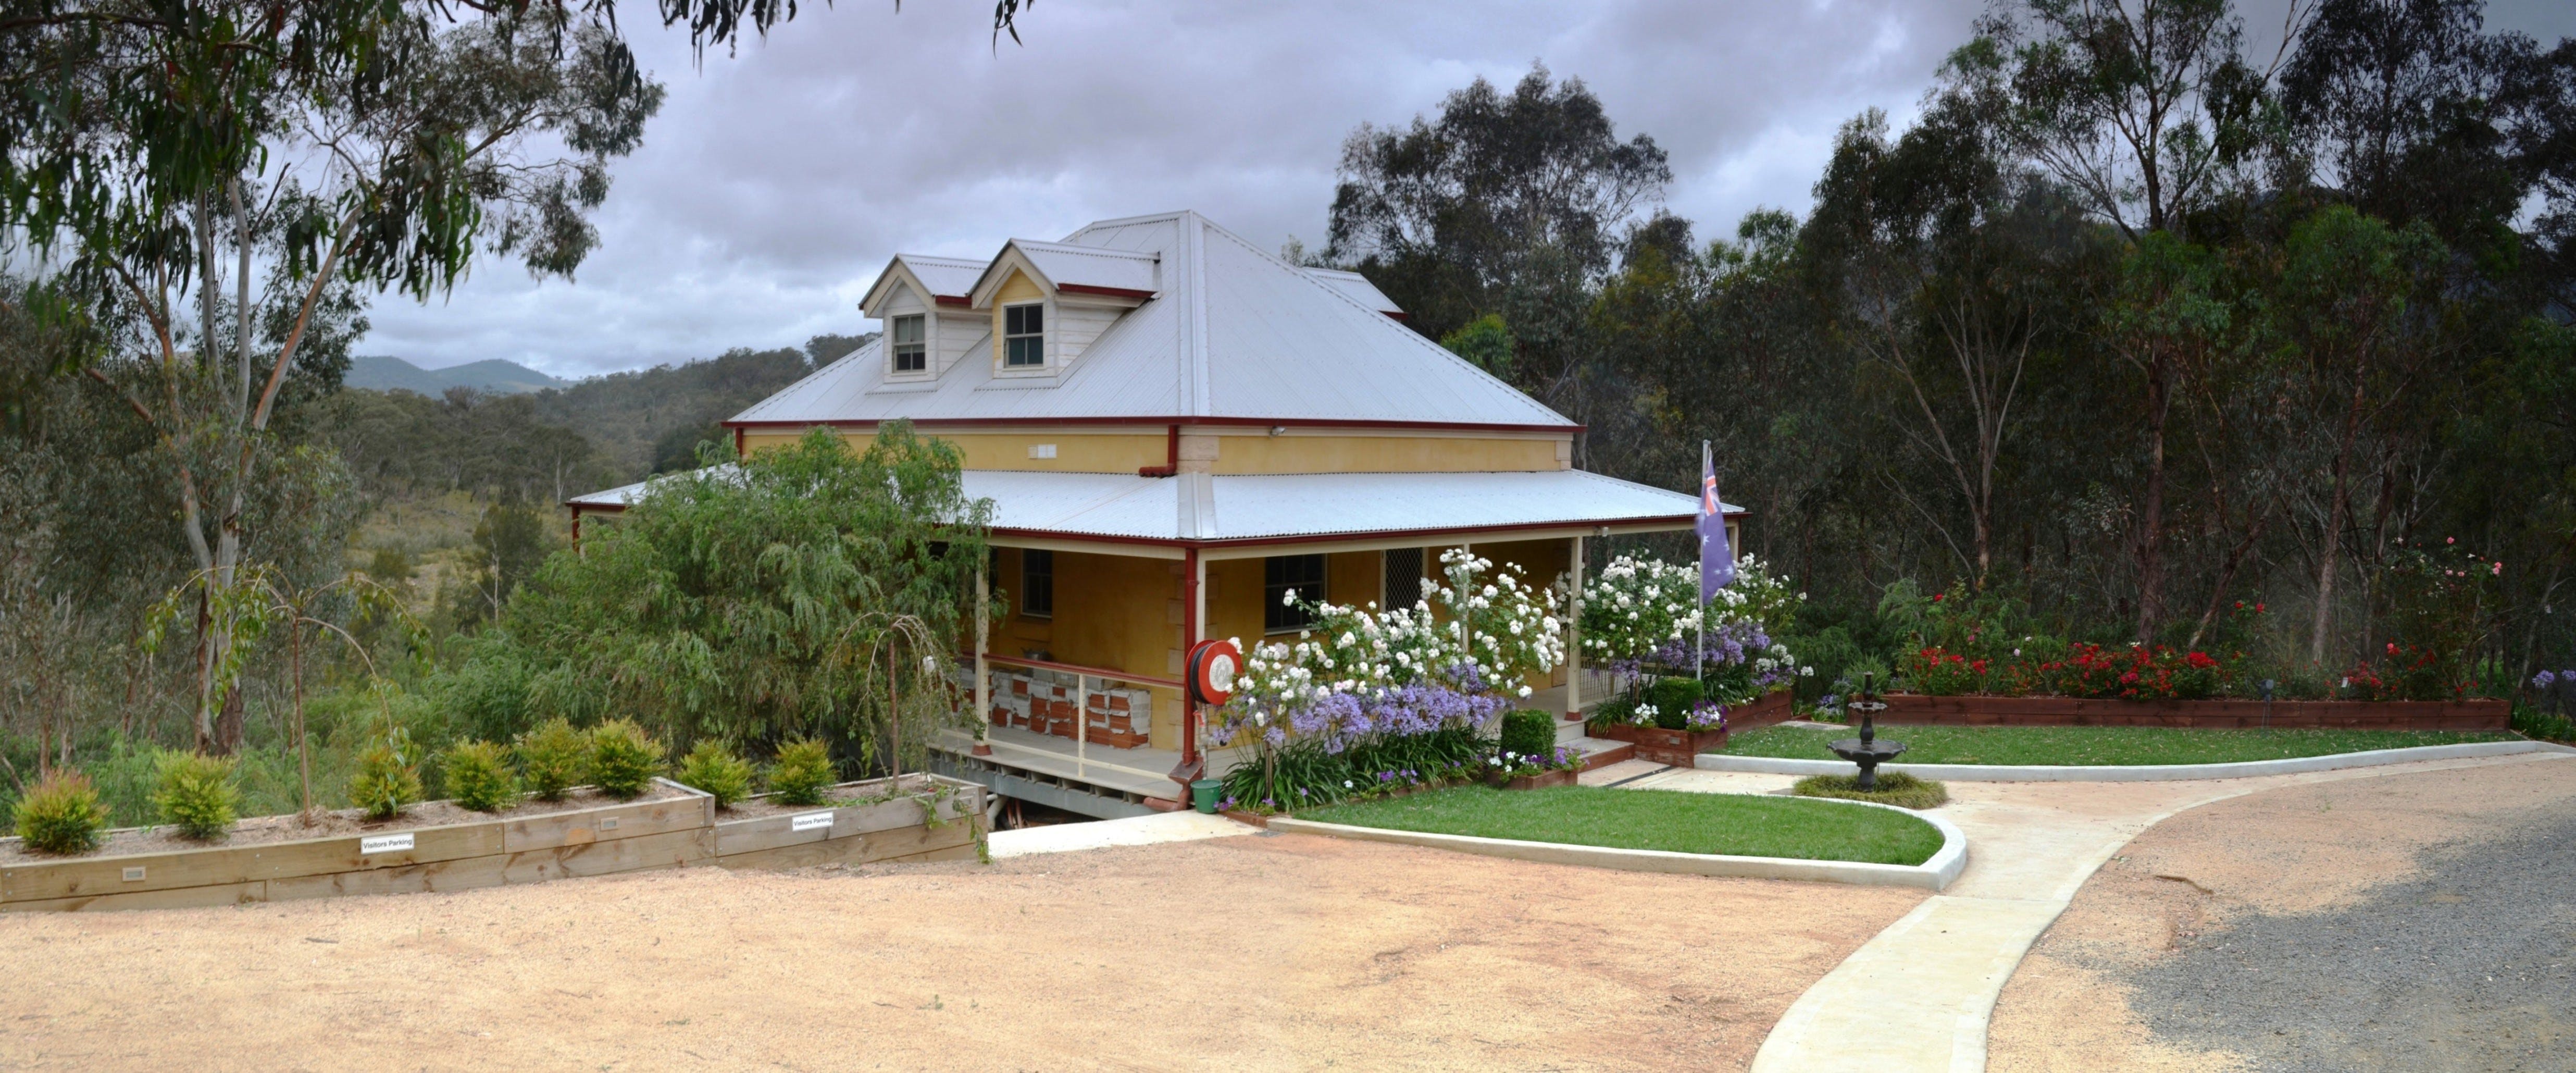 Tanwarra Lodge Bed and Breakfast - Kempsey Accommodation